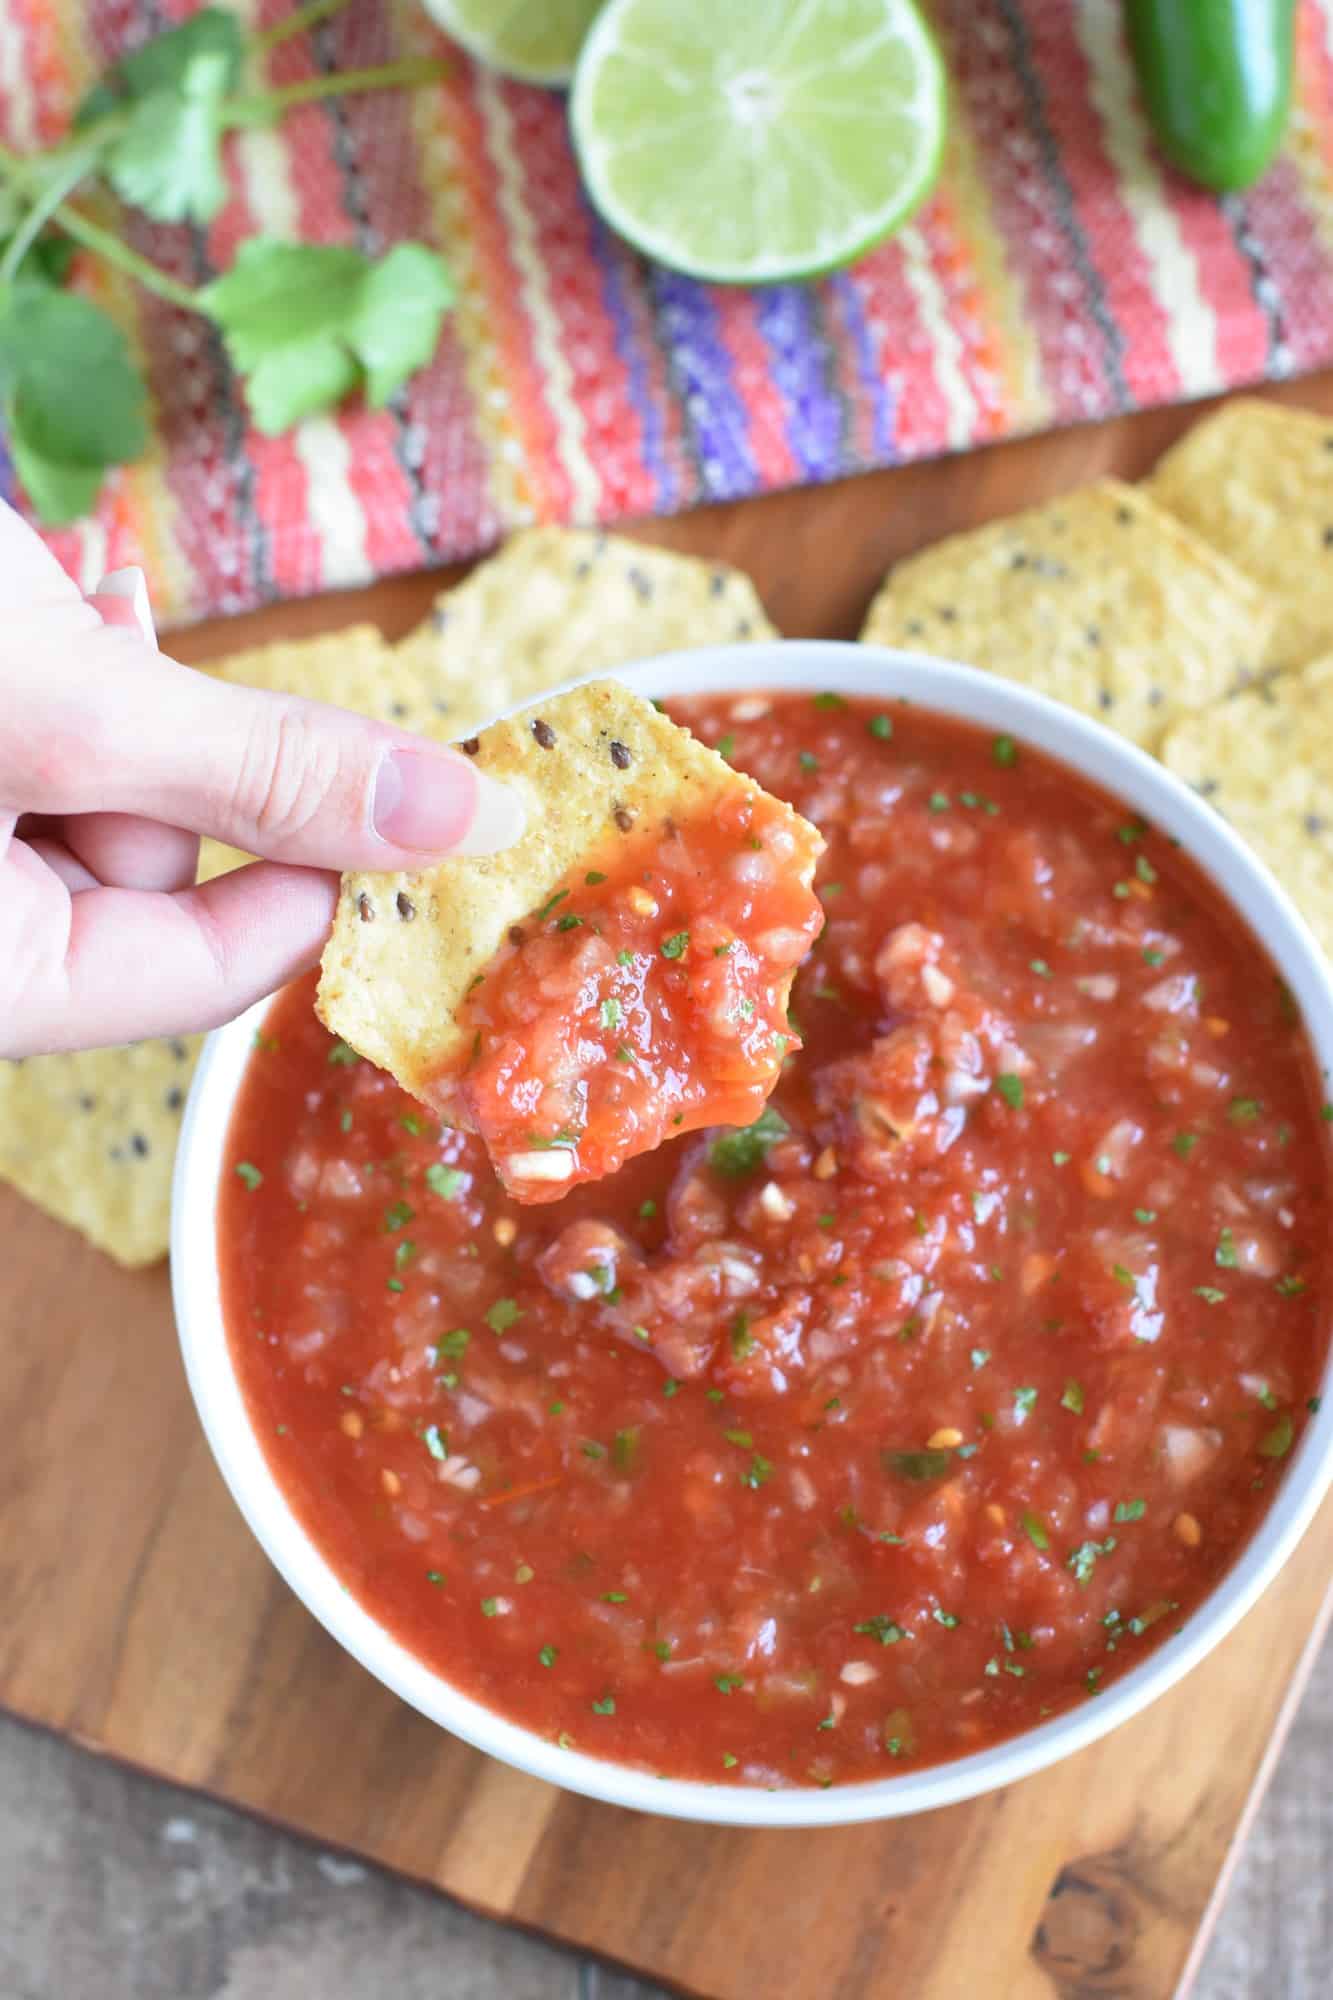 holding a chip with salsa on it over a bowl of salsa